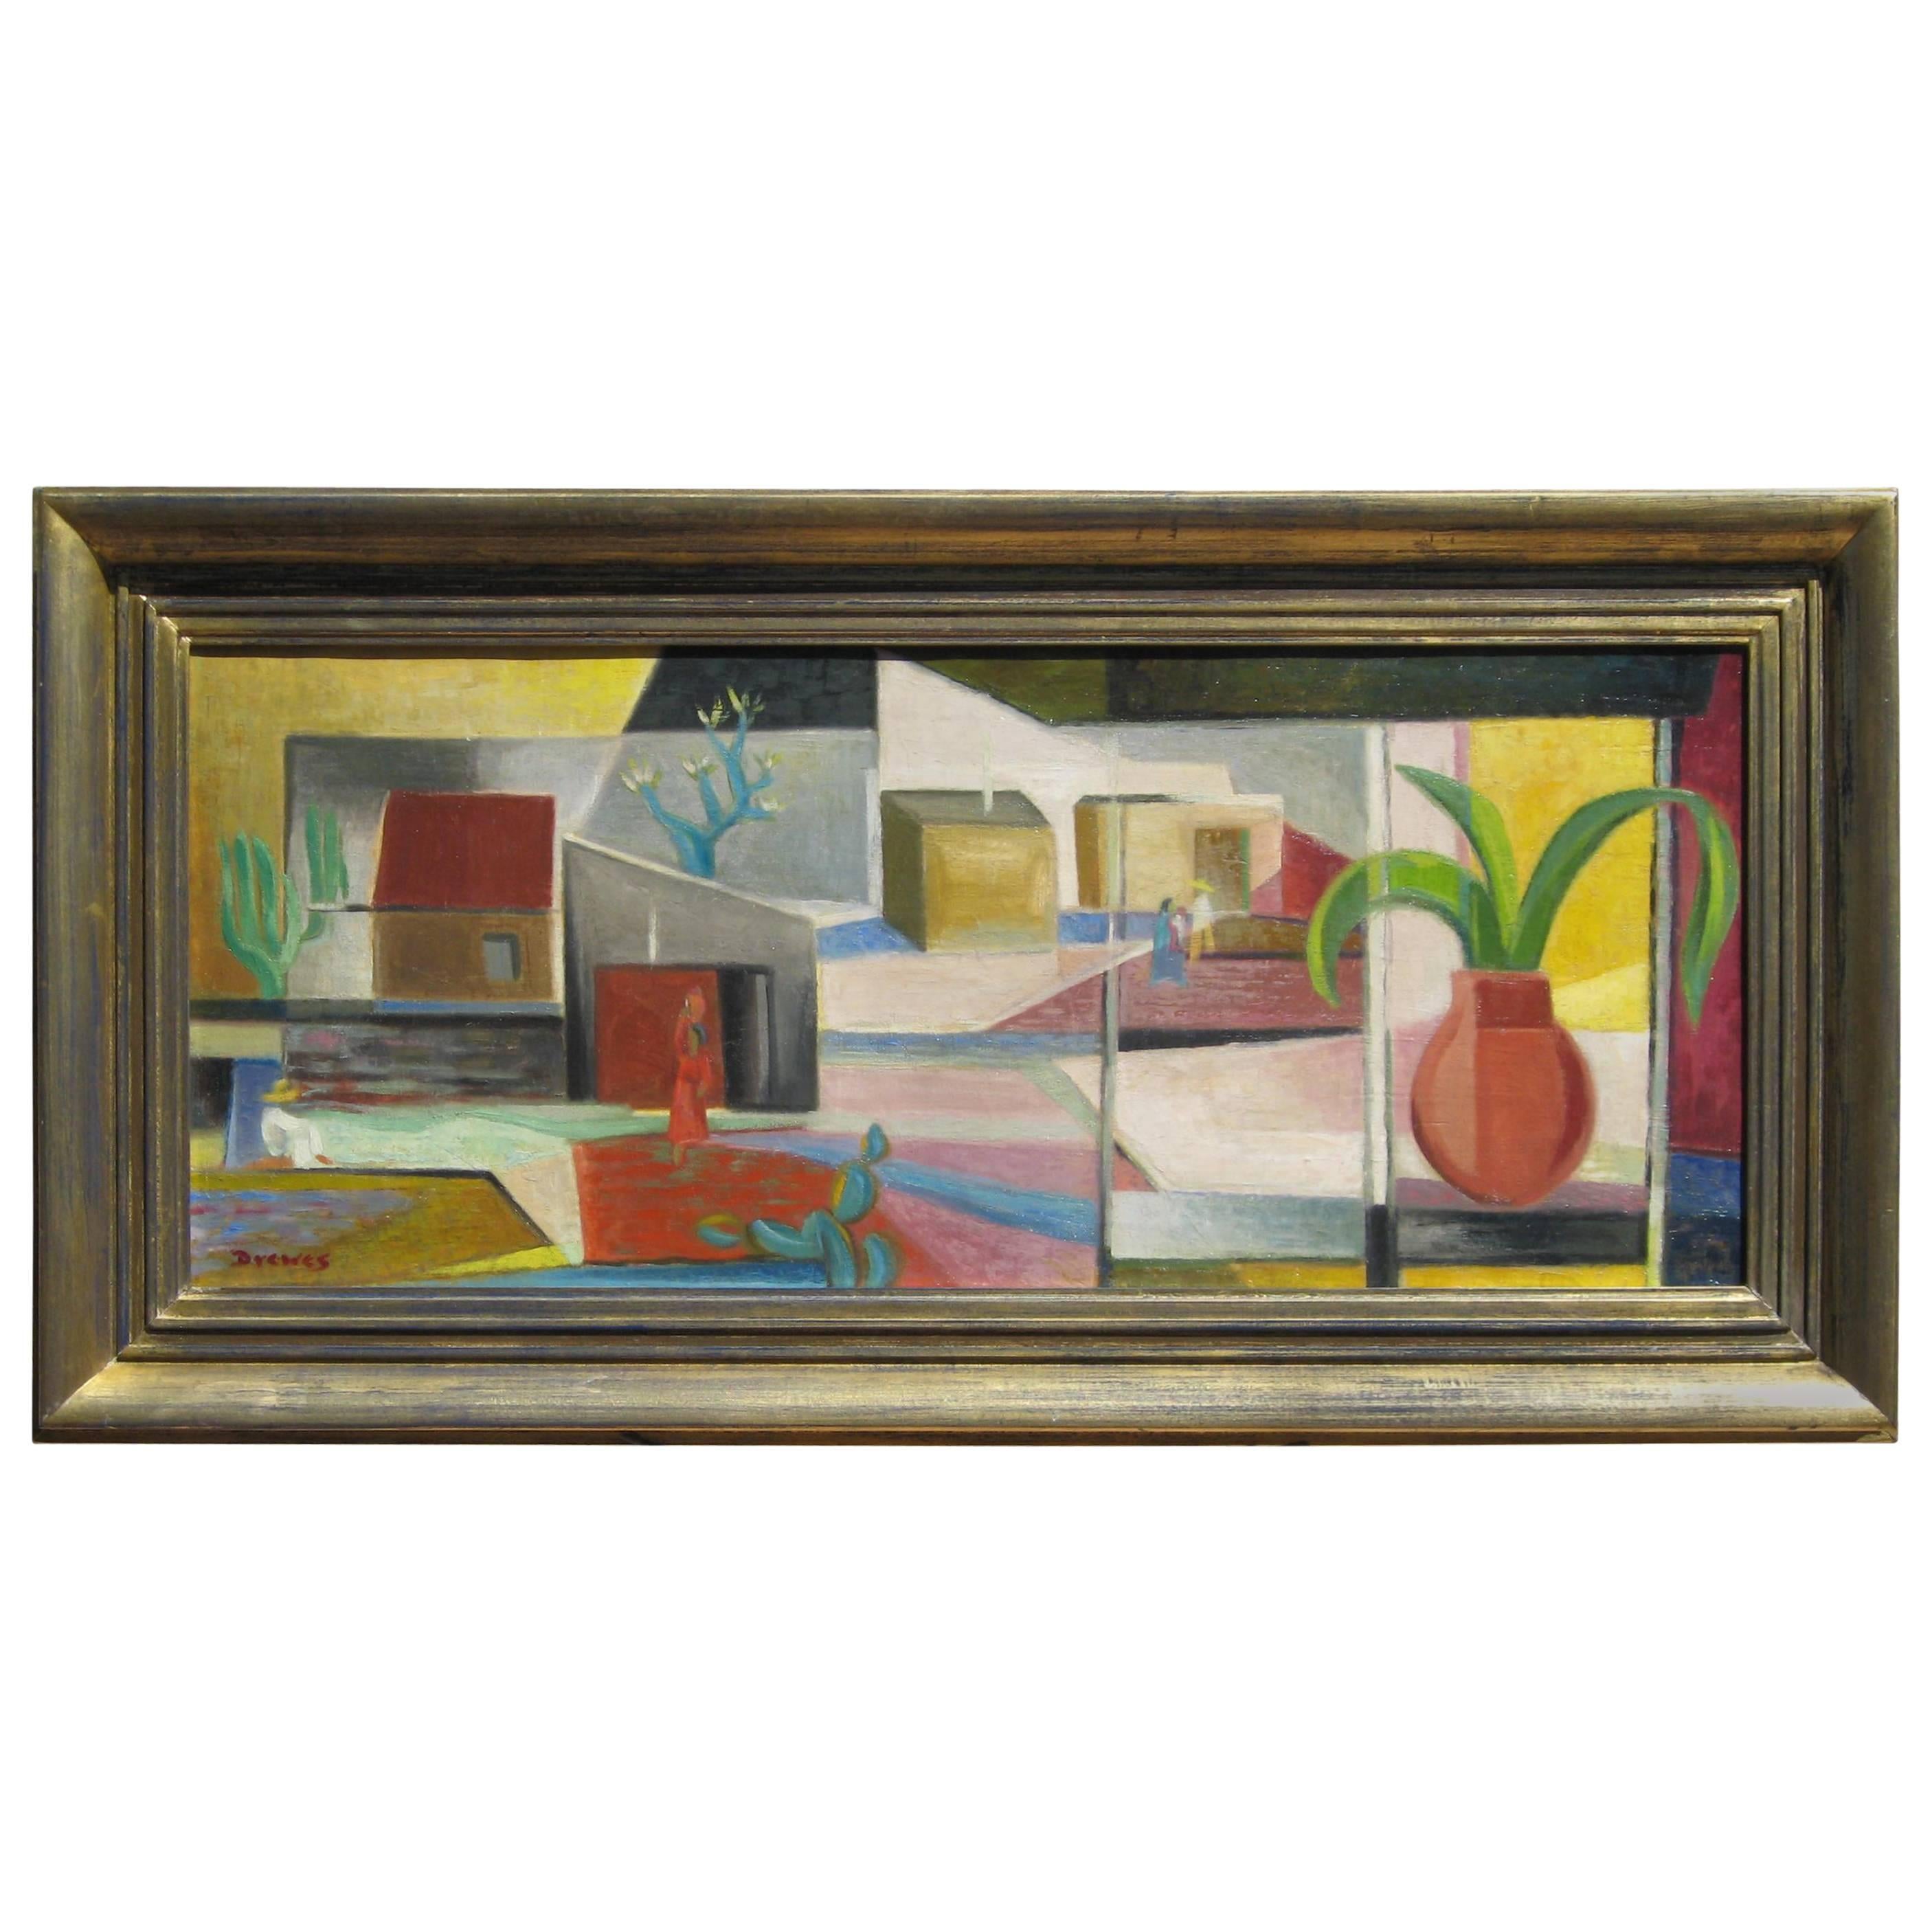 Werner Drewes Modernist American Painting, Southwest Subject, 1947 For Sale